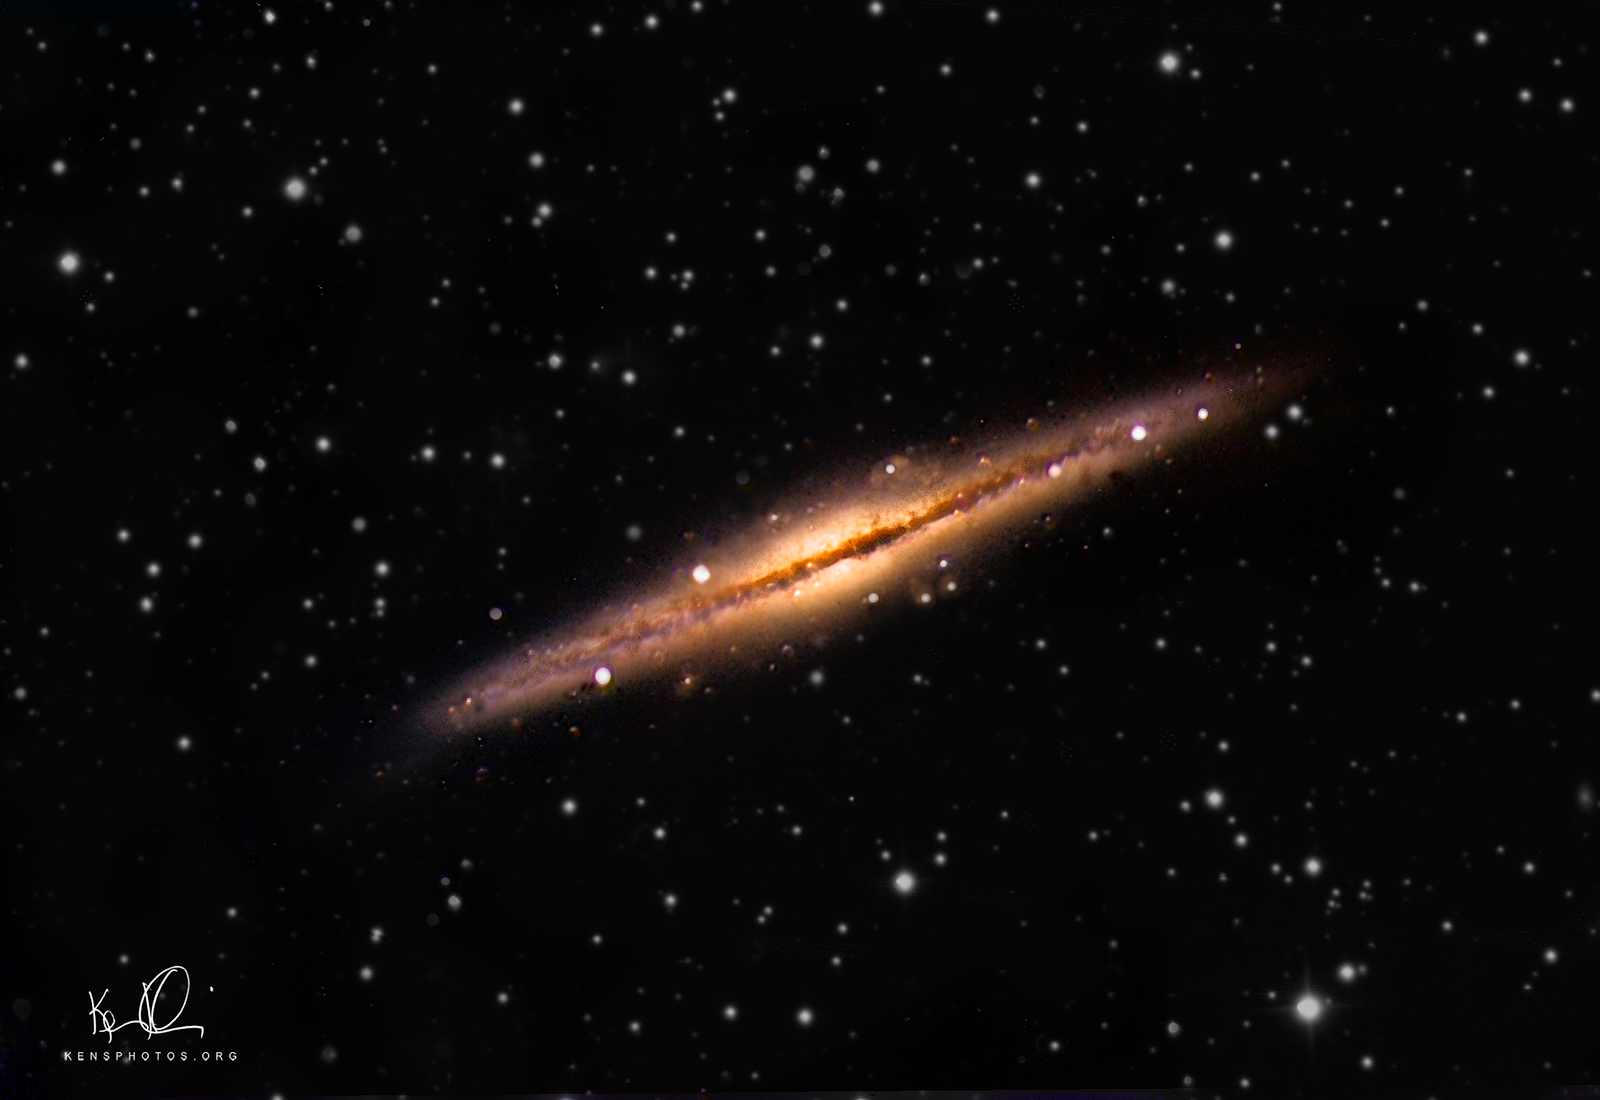   NGC 891. &nbsp; THIS IS A PHOTO OF AN EDGE-ON GALAXY WHICH APPEARS AS A THIN DISK. &nbsp;VERY DIFFERENT THAN M51 OR M31 WHERE YOU SEE THE GALAXY AT AN ANGLE. 